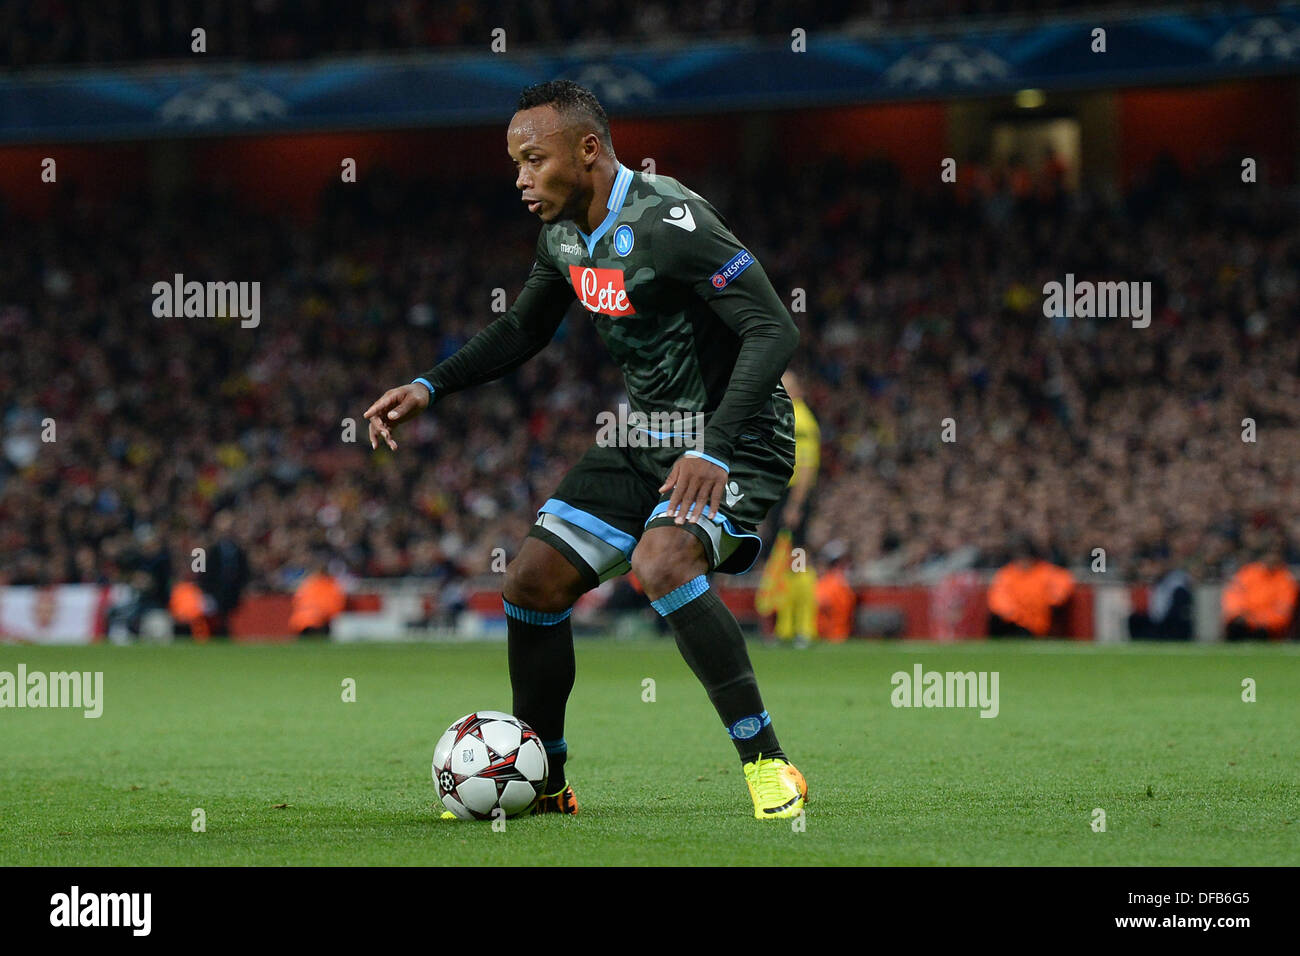 London, UK. 01st Oct, 2013. Napoli's defender Camilo Zuniga from Columbia during the UEFA Champions League match between Arsenal from England and Napoli from Italy played at The Emirates Stadium, on October 01, 2013 in London, England. © Mitchell Gunn/ESPA/Alamy Live News Stock Photo